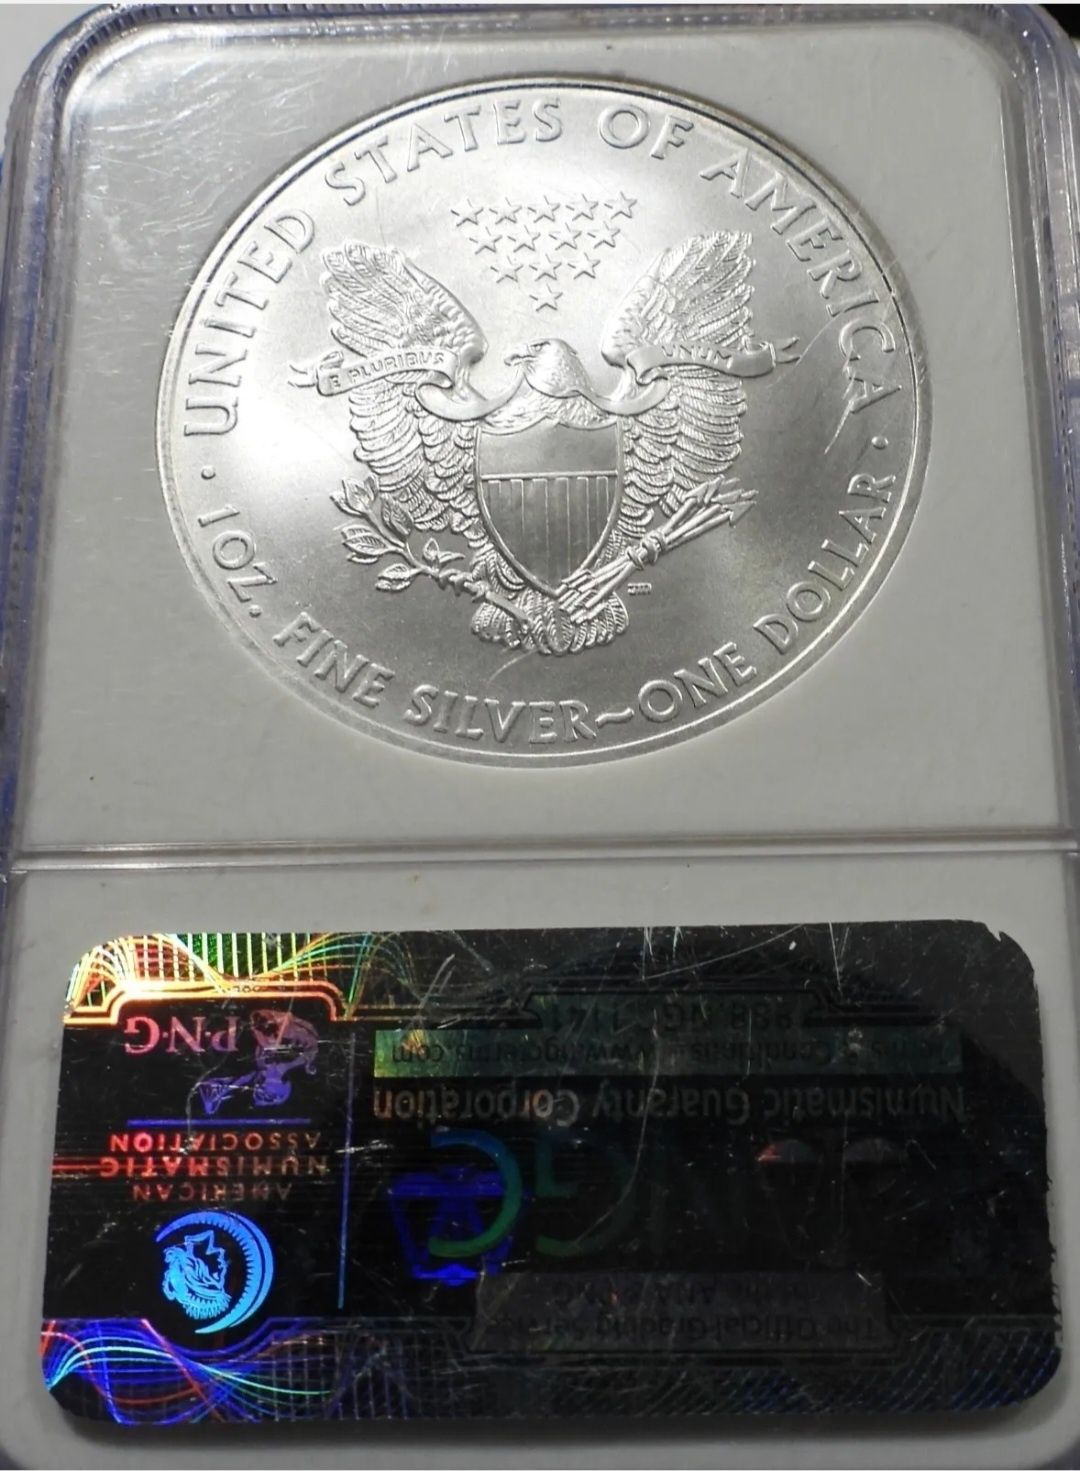 USA one silver dollar Top Grade MS 70 & MS 69